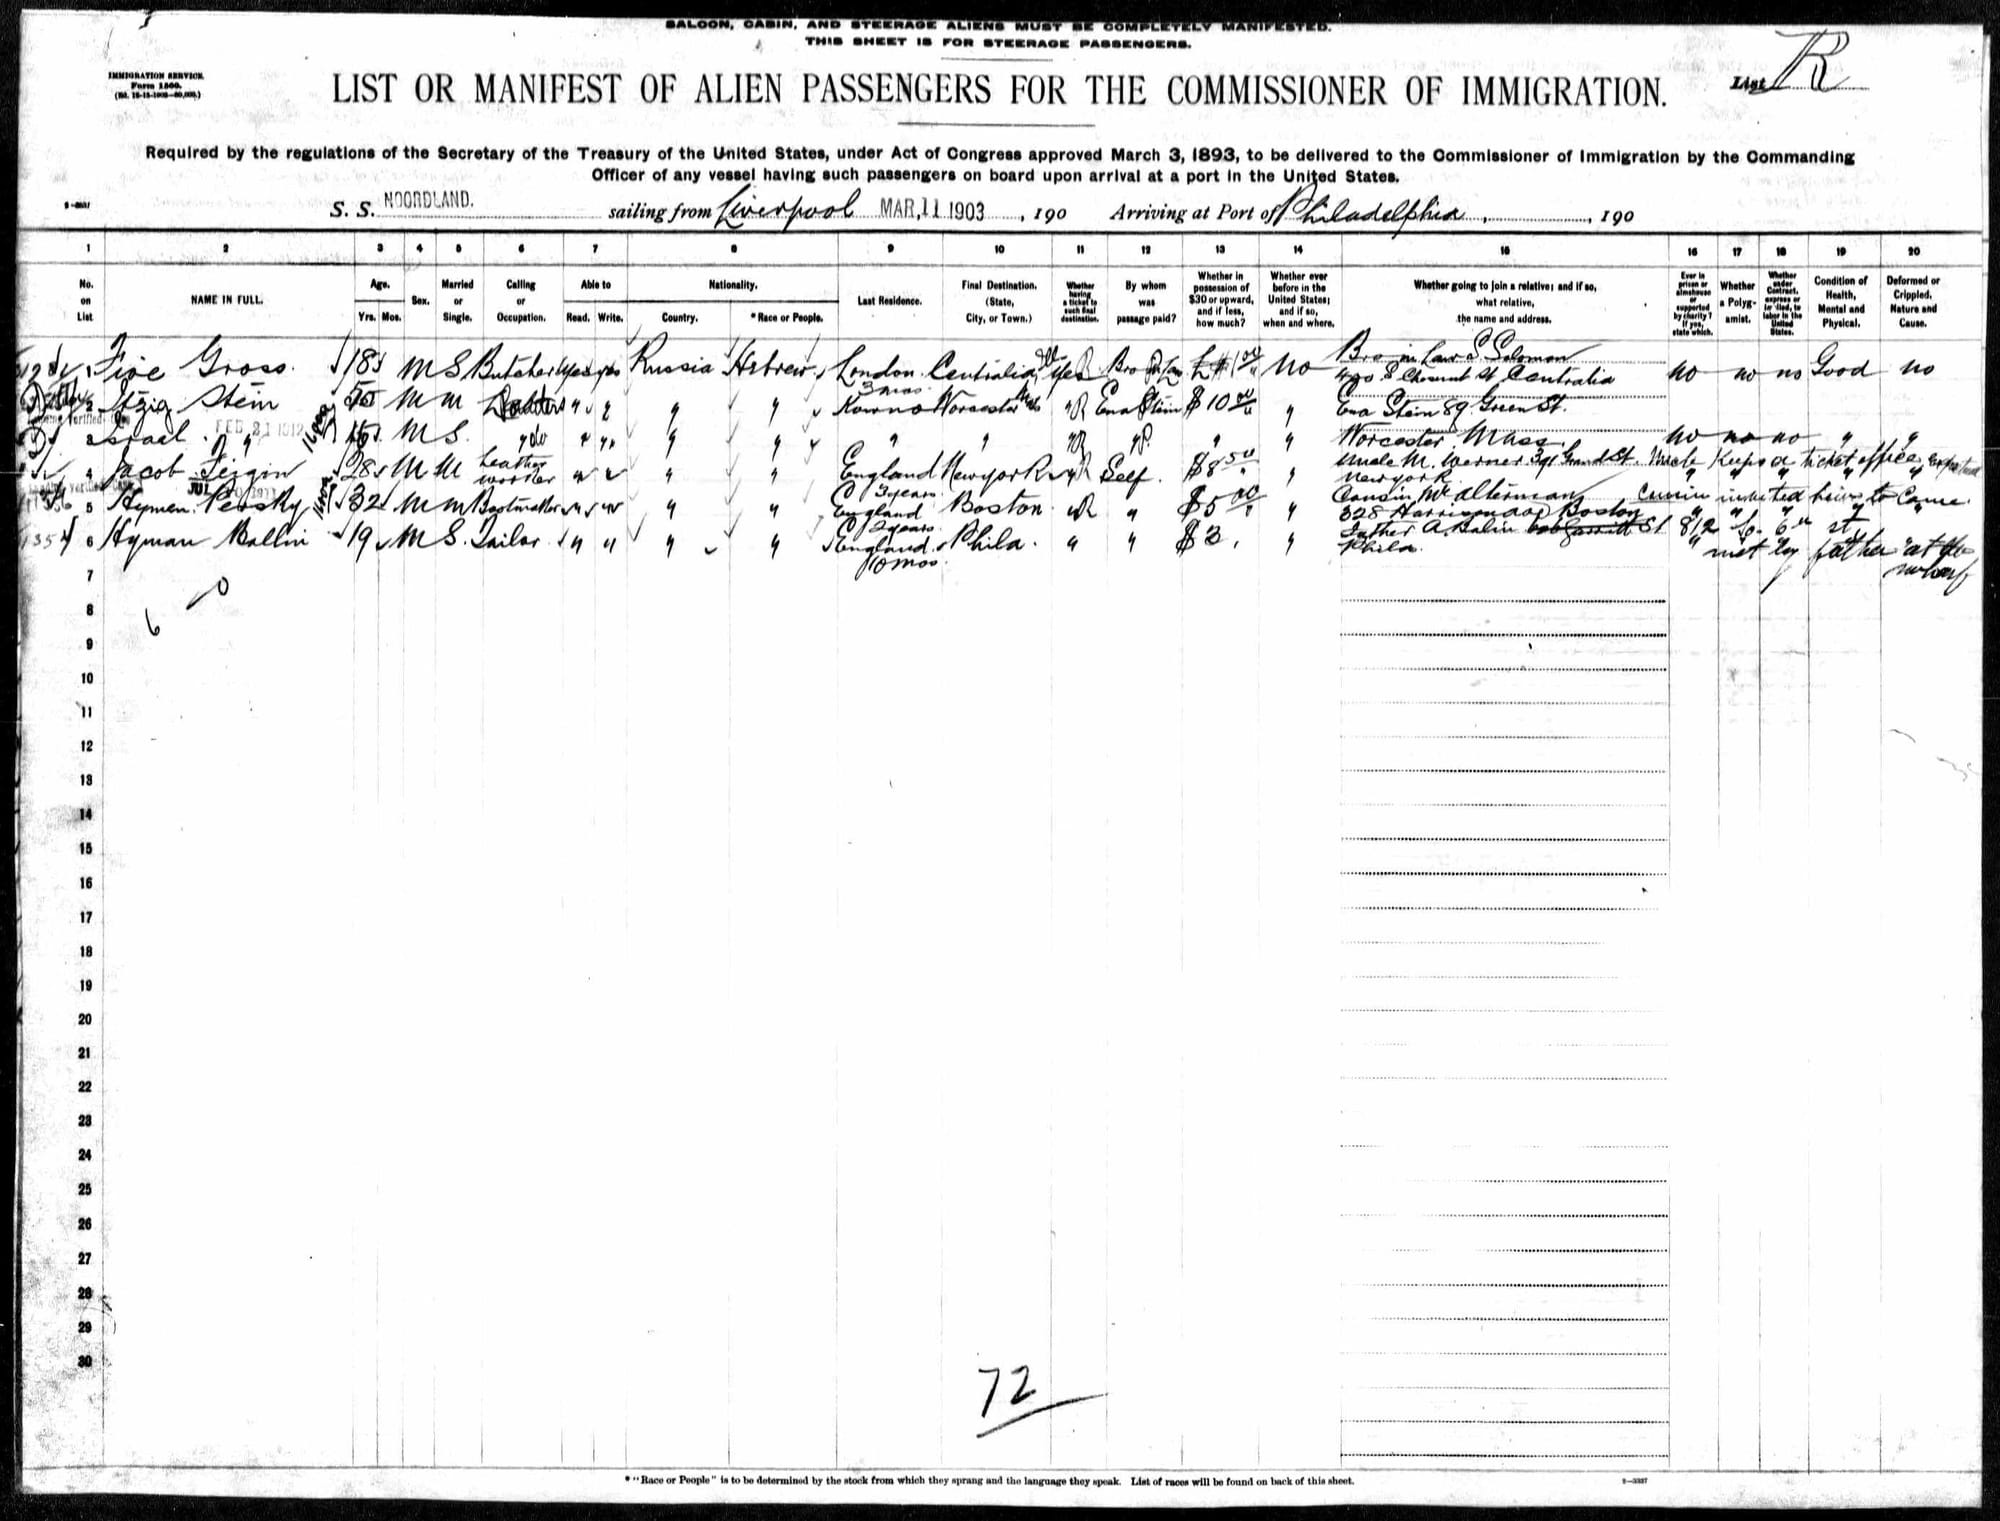 The Passenger Manifest showing the arrival of my great-great-grandfather and great-granduncle in Philadelphia. In the comments field, it mentions my great-grandaunt, Eva Stein.